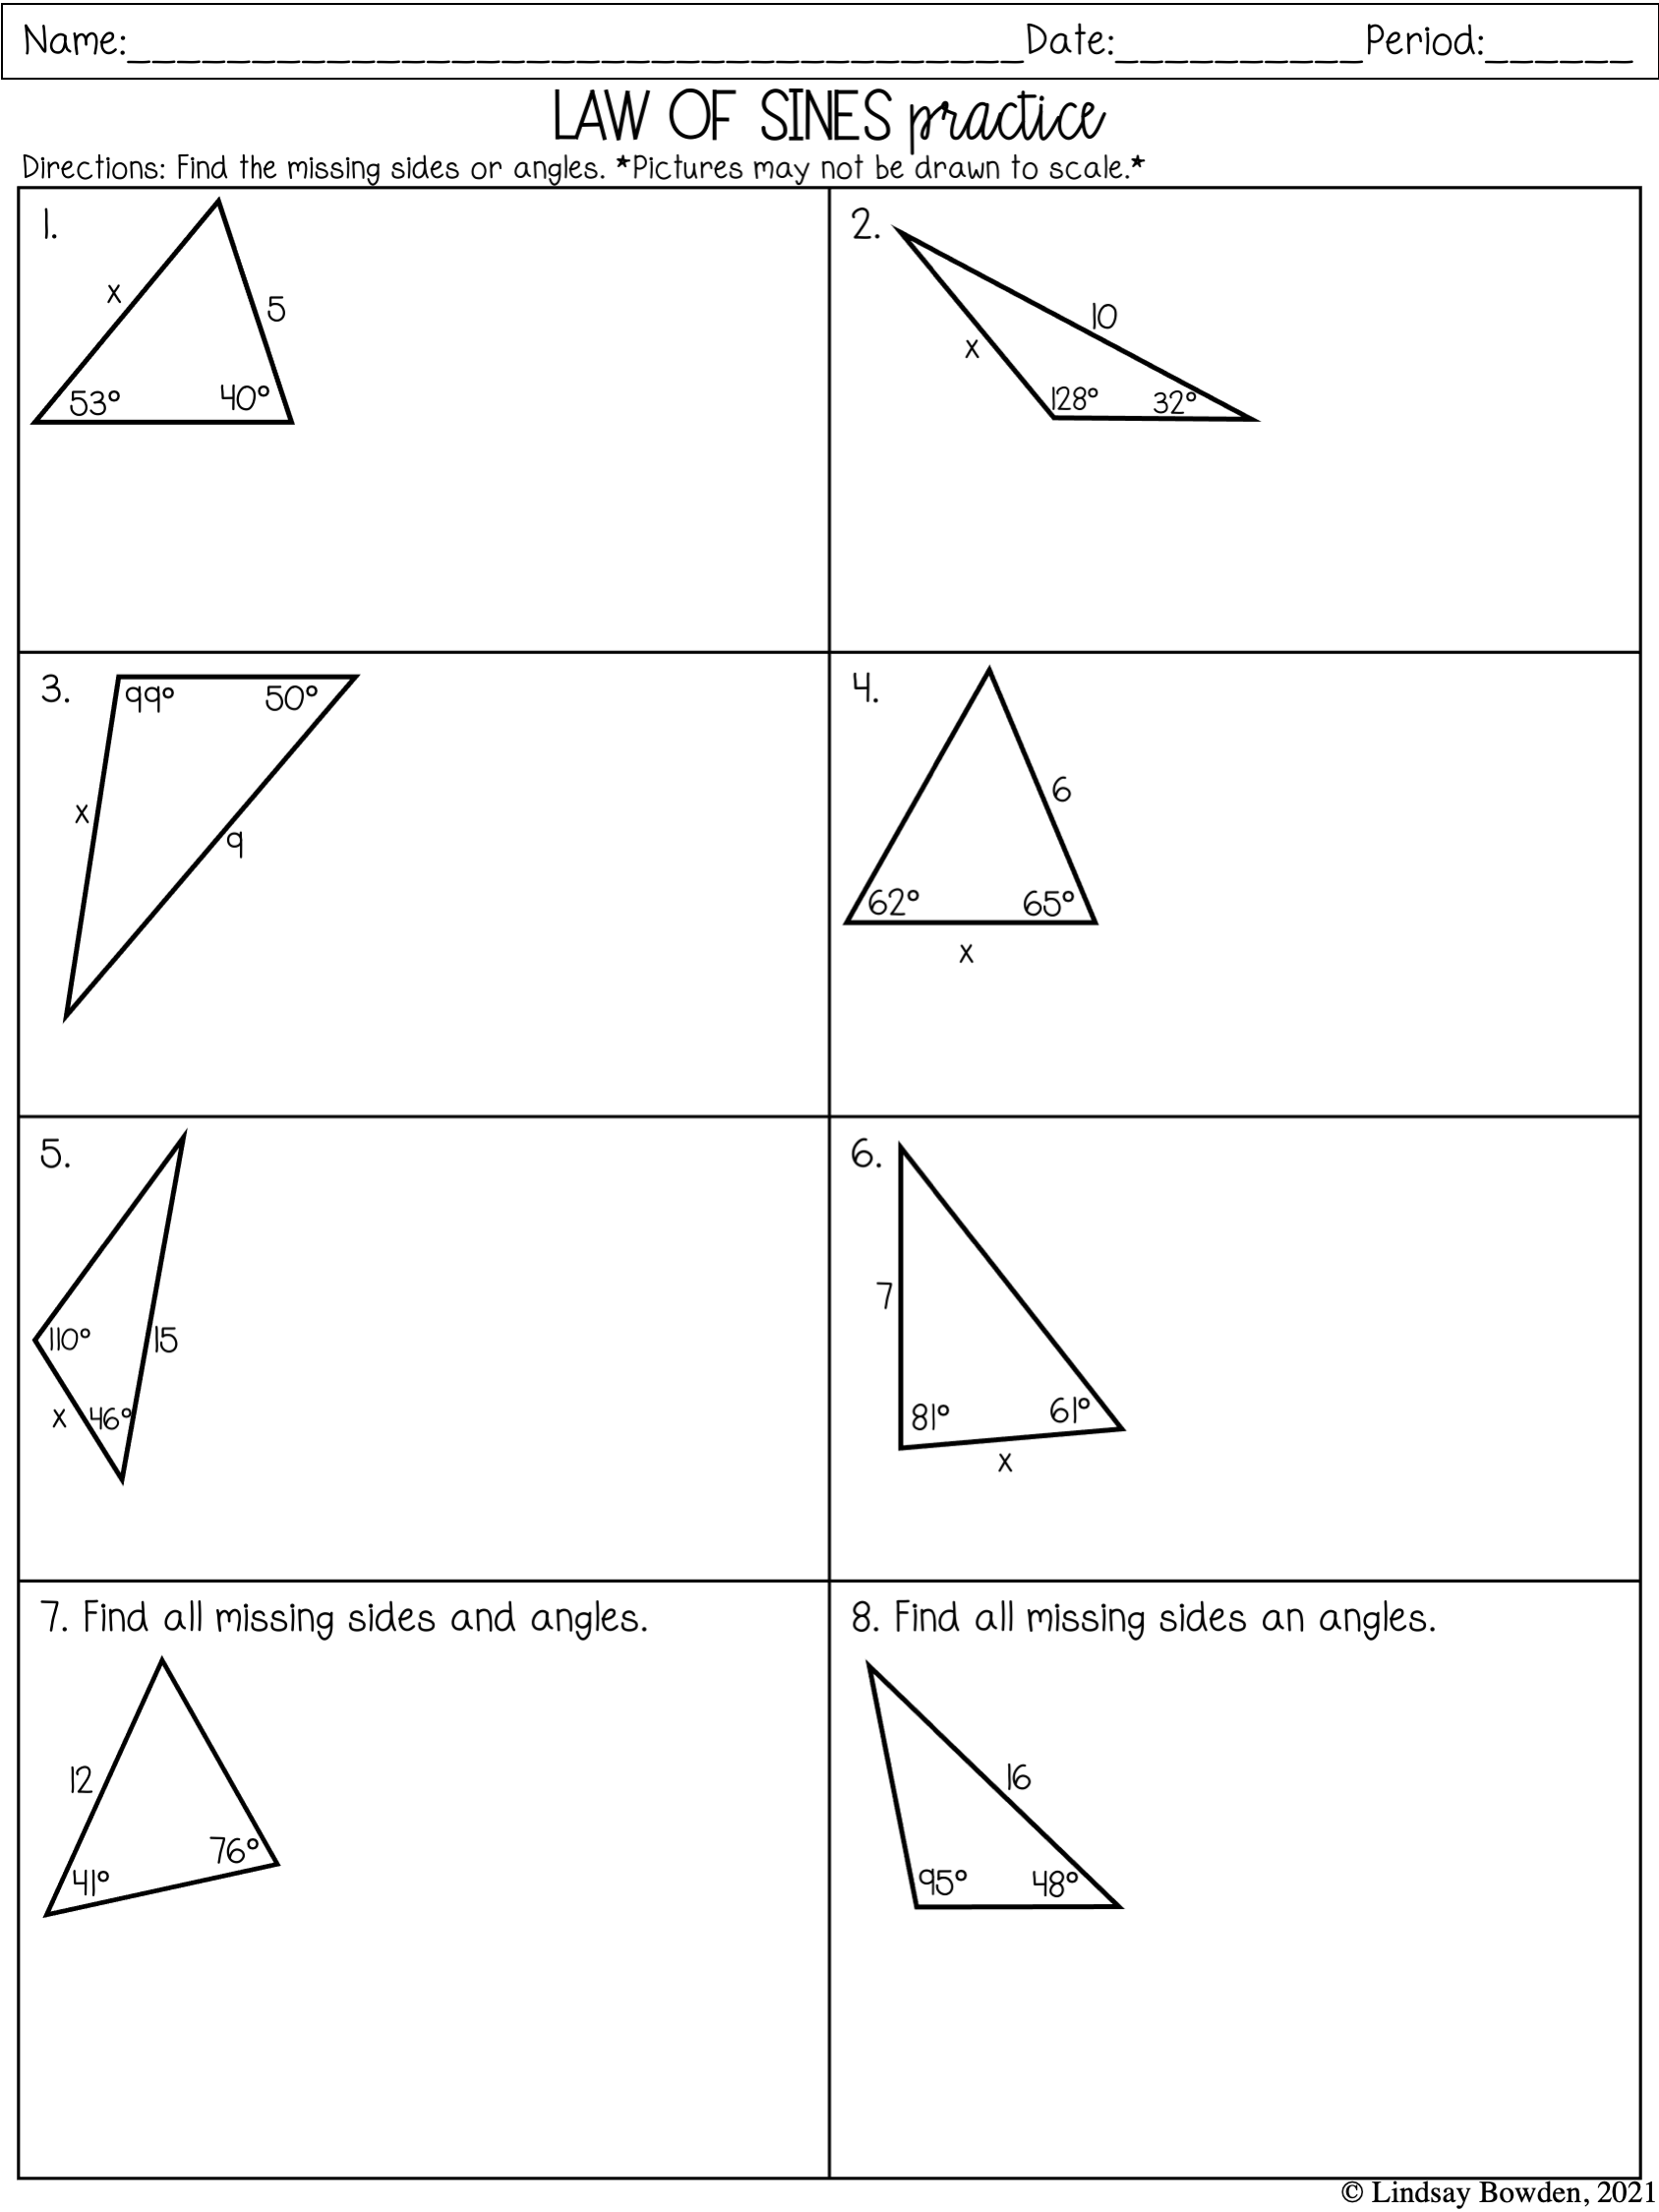 Law of Sines and Cosines Notes and Worksheets - Lindsay Bowden In Law Of Sines Worksheet